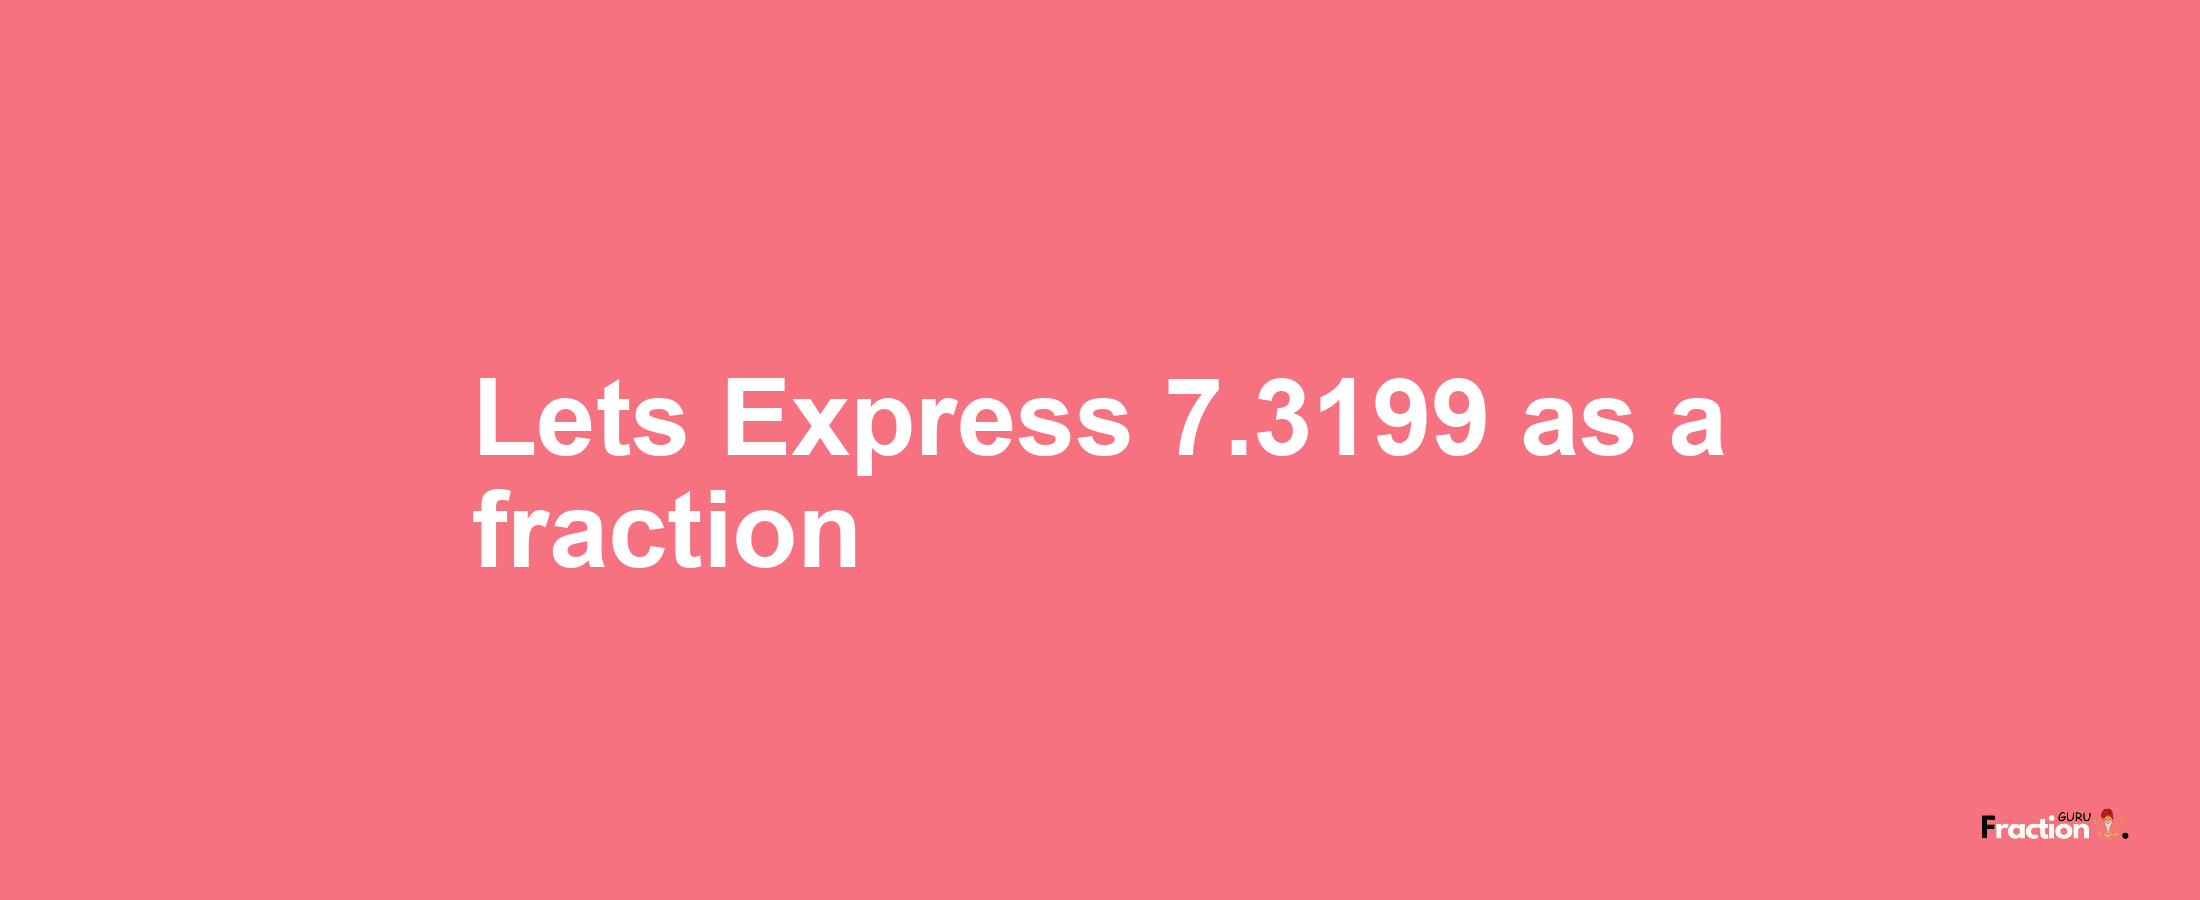 Lets Express 7.3199 as afraction